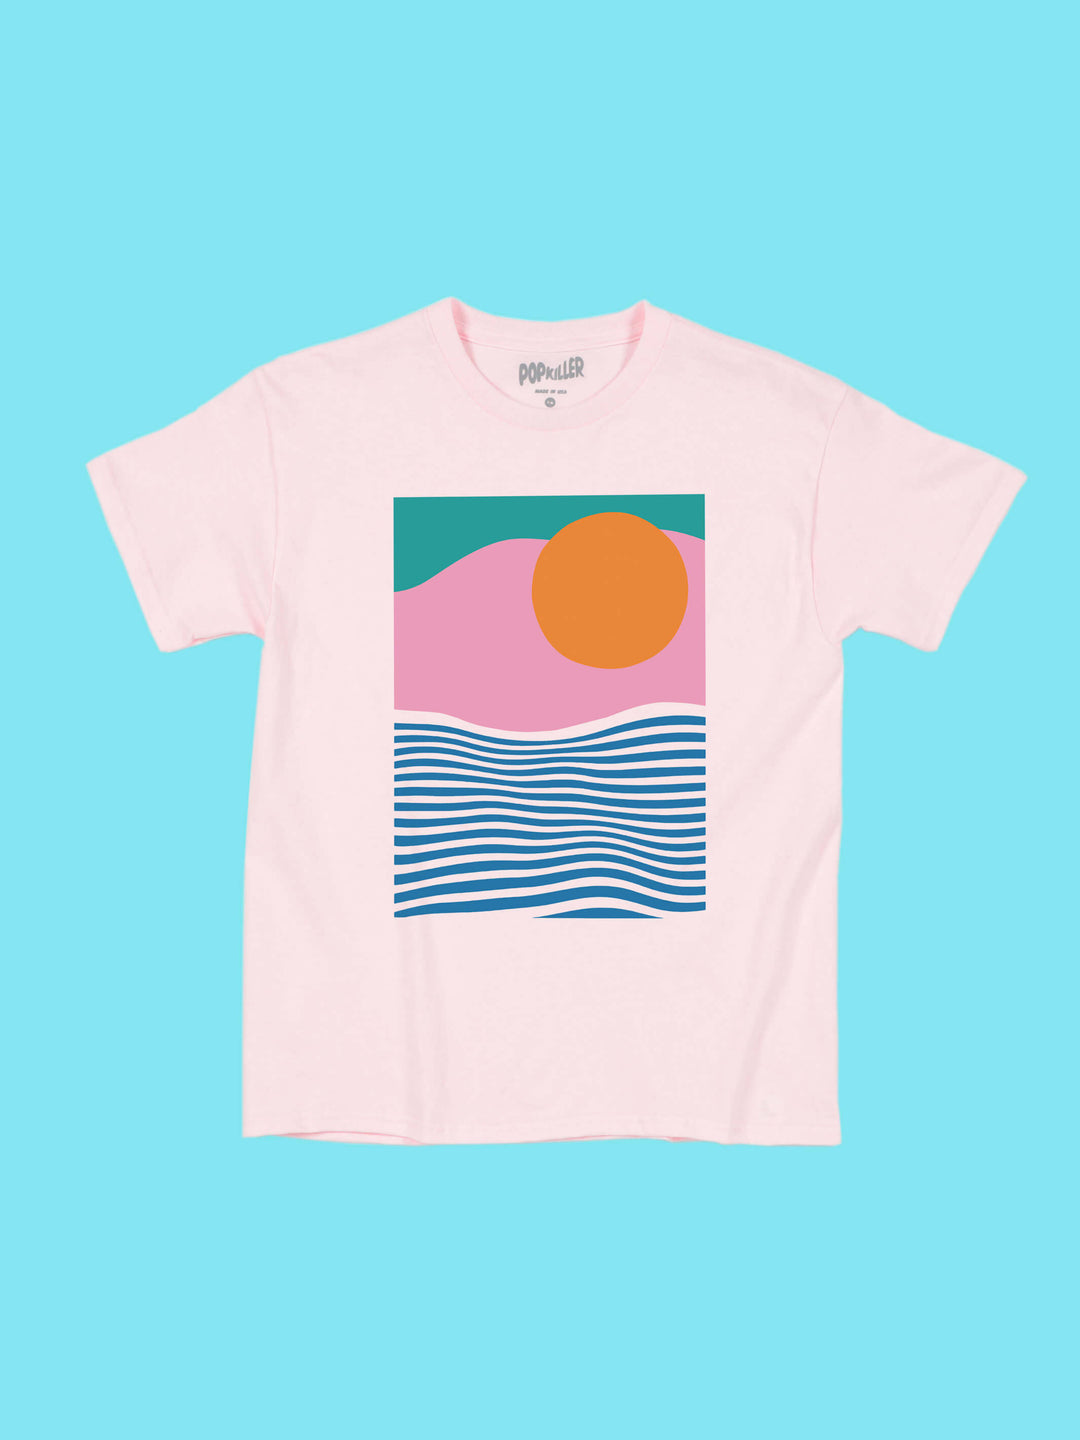 Abstract vaporwave sunrise graphic tee.